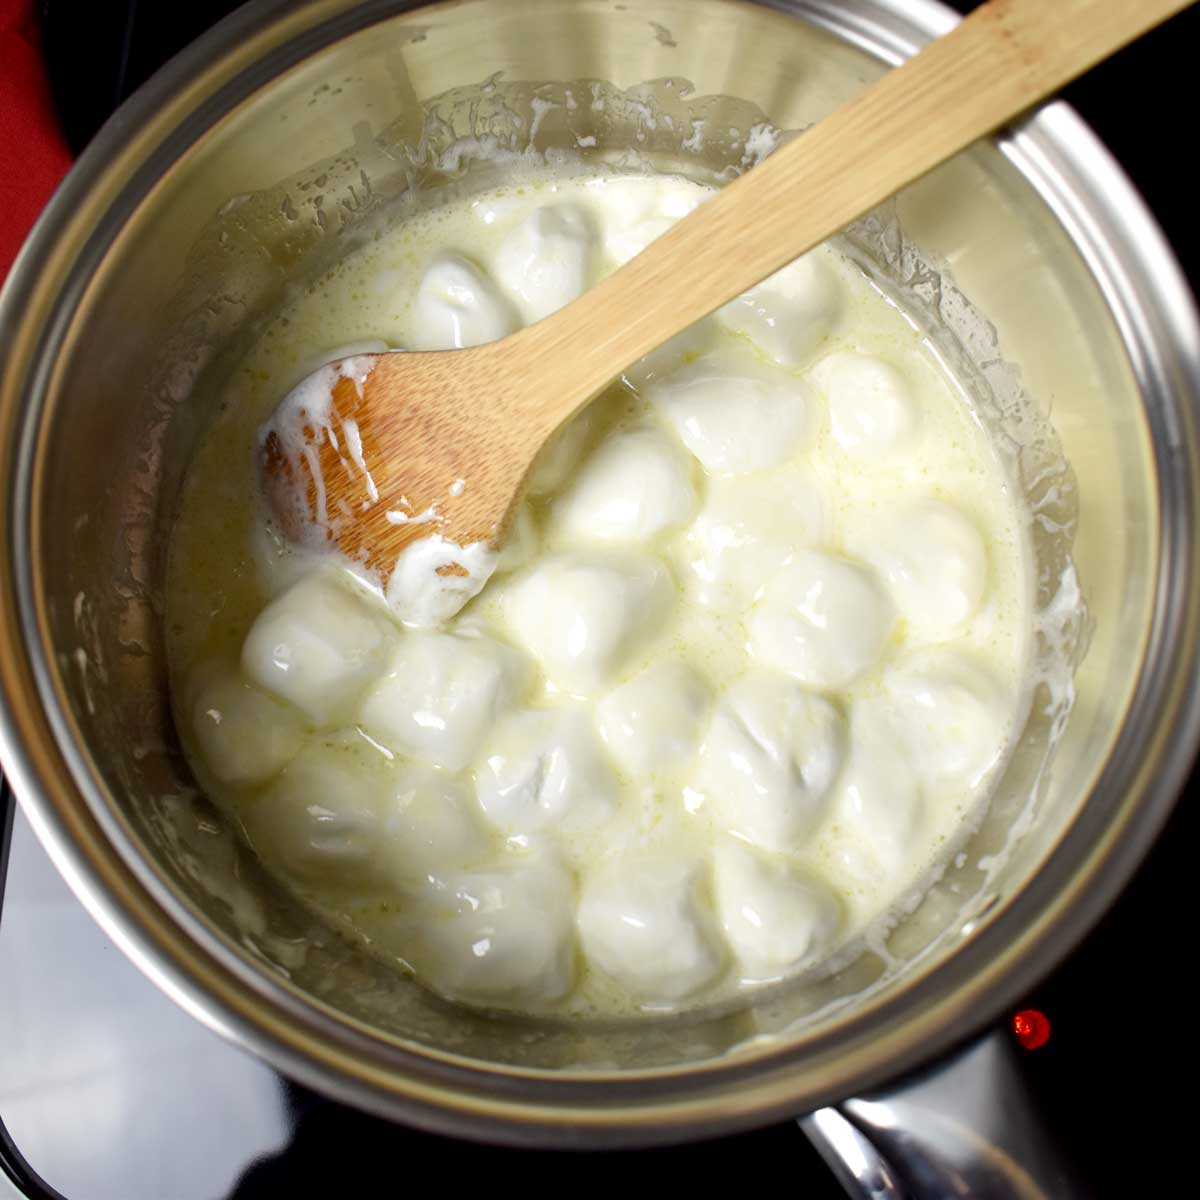 Melting butter, marshmallows, and a wooden spoon in a large saucepan.